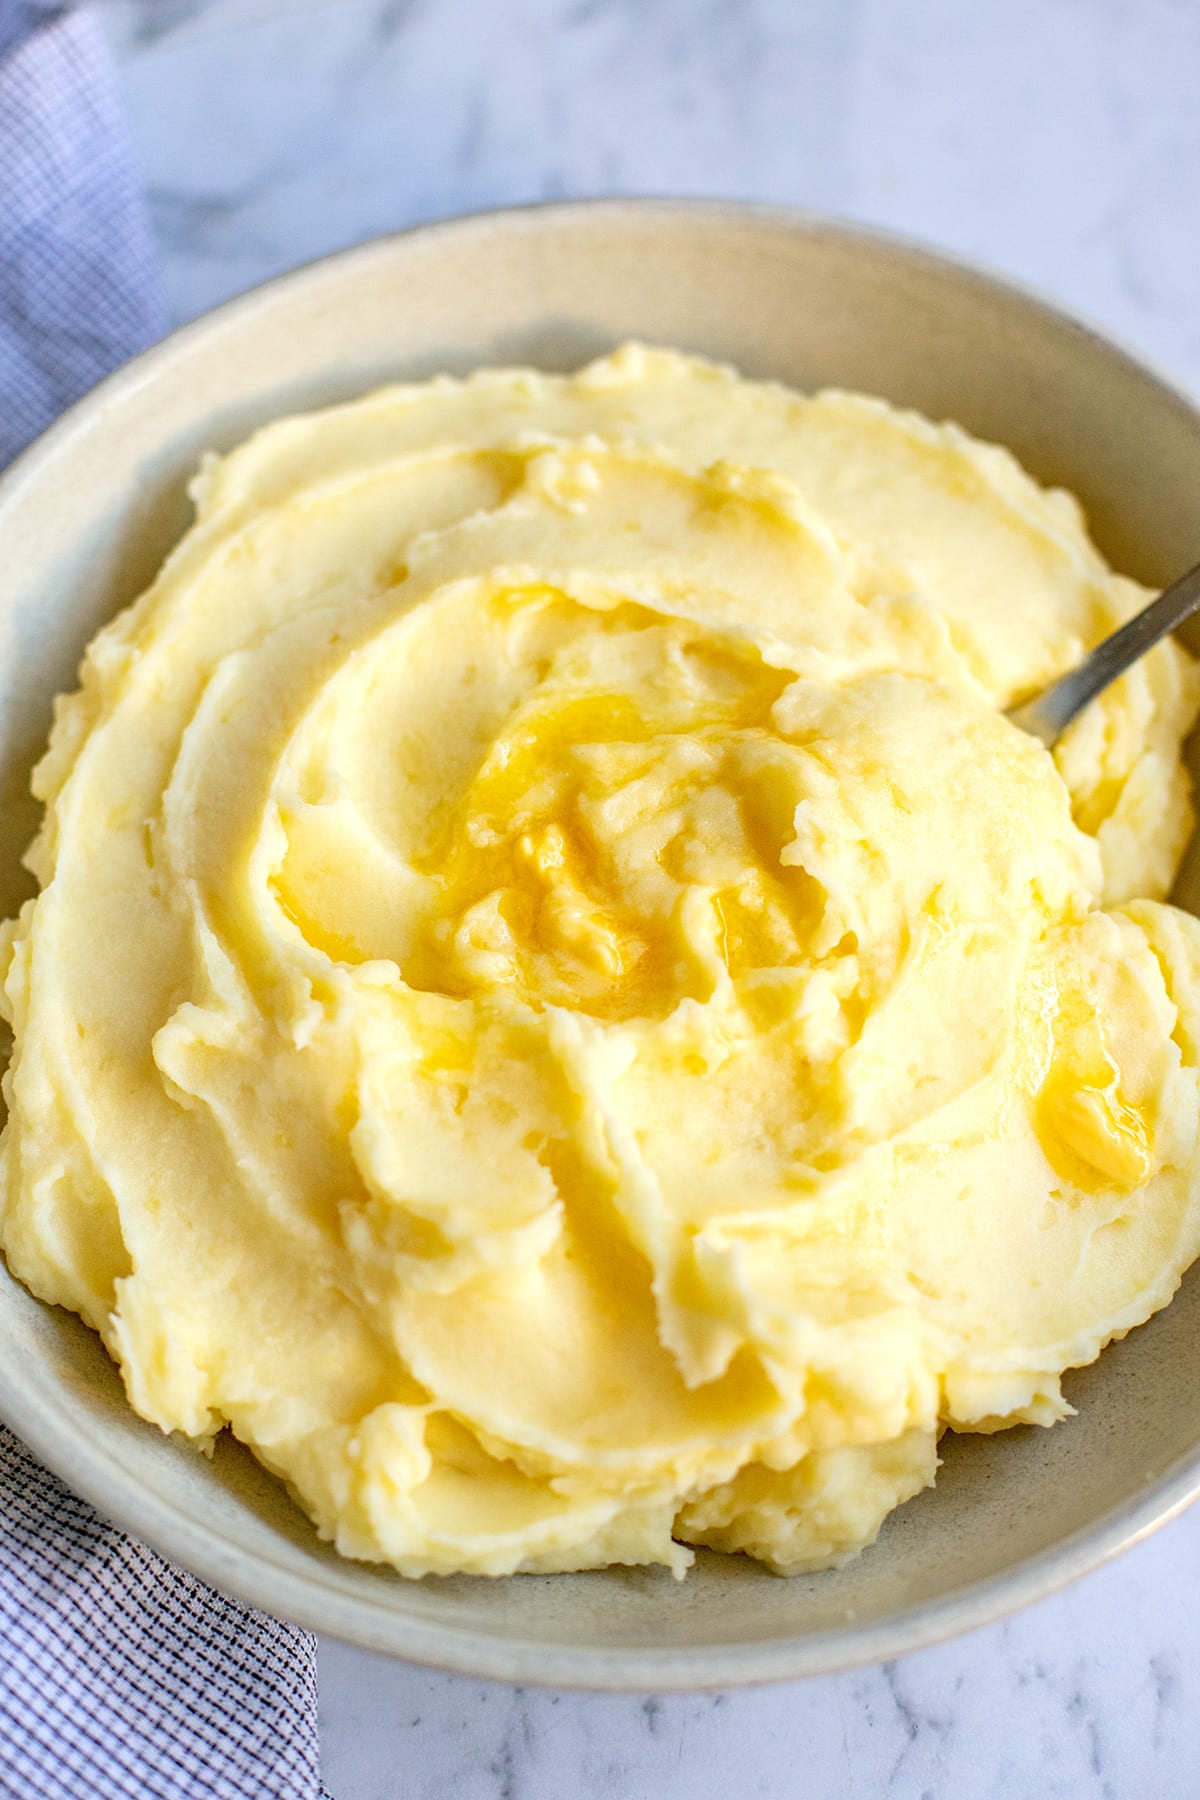 Mashed potatoes with sour cream